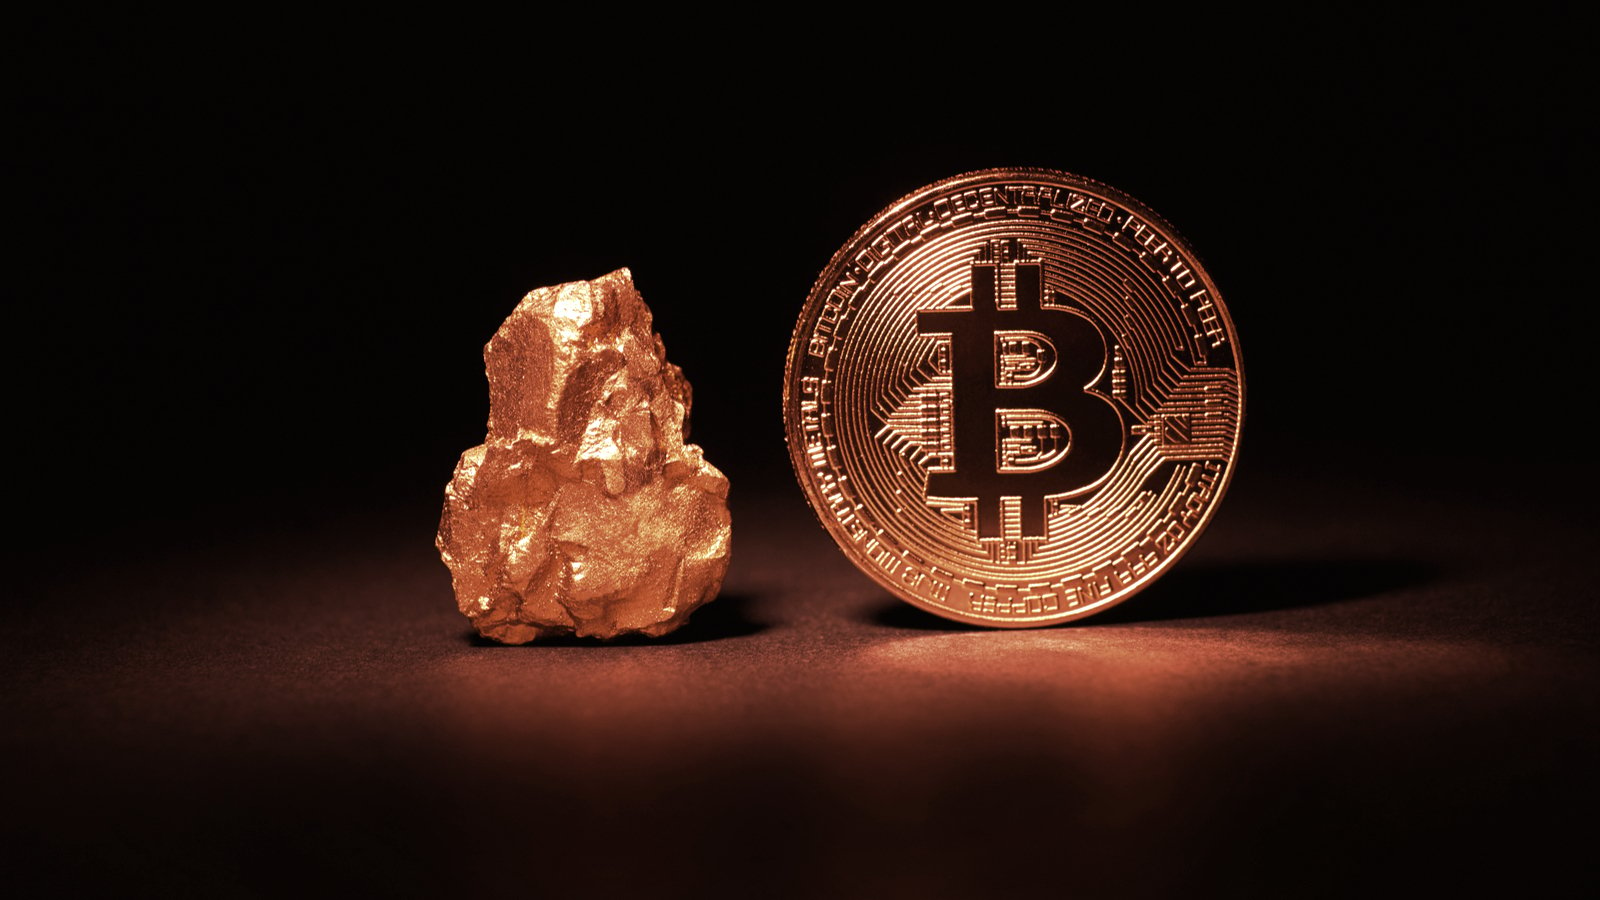 Bitcoin and gold. Image: Shutterstock